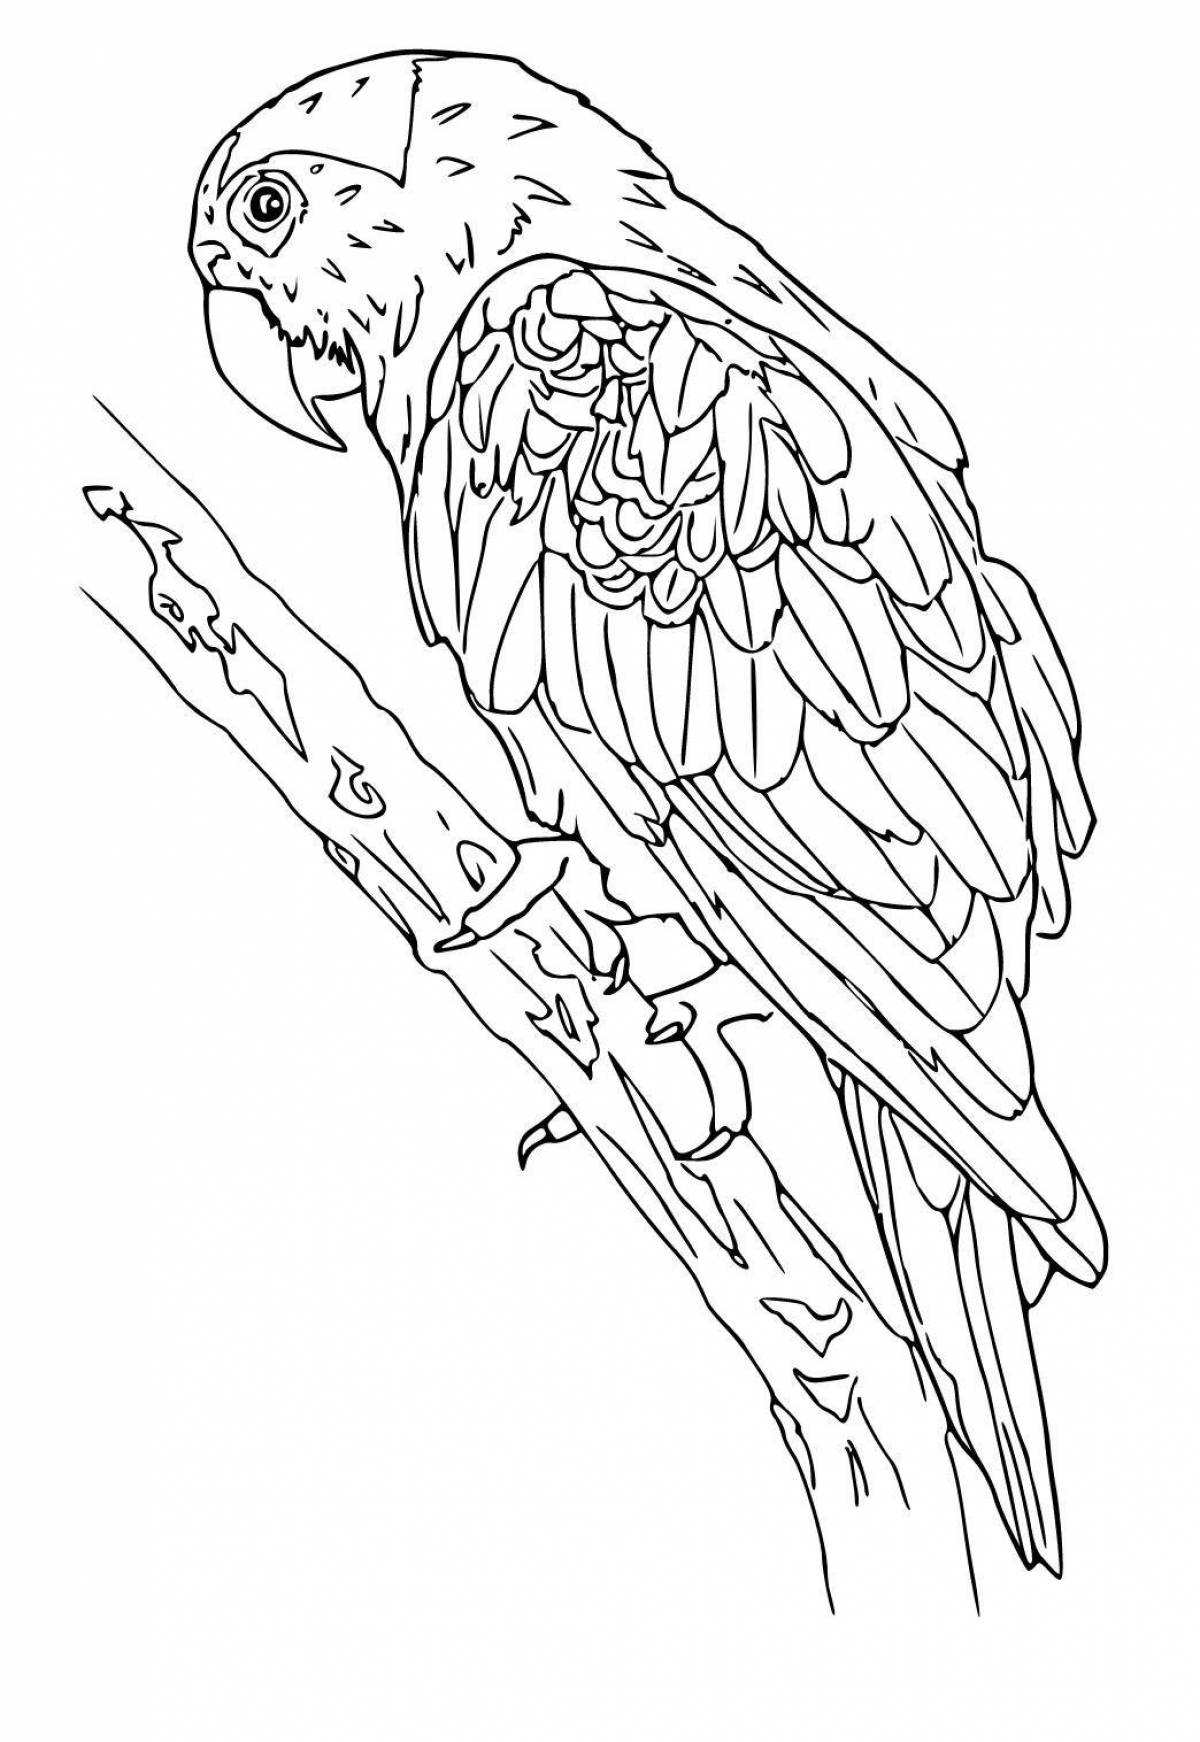 Wonderful parrot coloring book for kids 6-7 years old